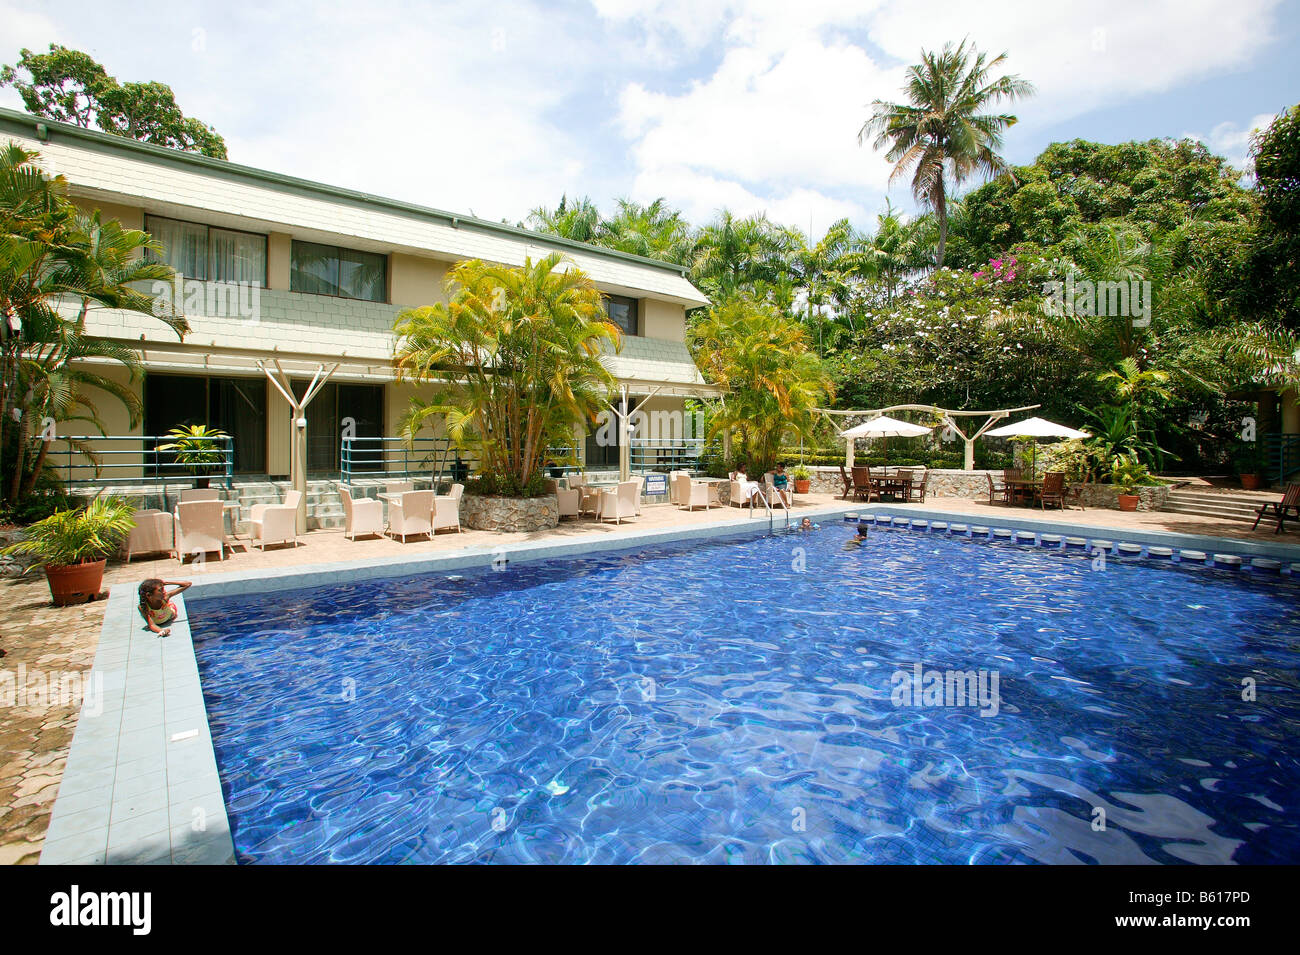 Hotel Swimming Pool Port Moresby Papua New Guinea - 